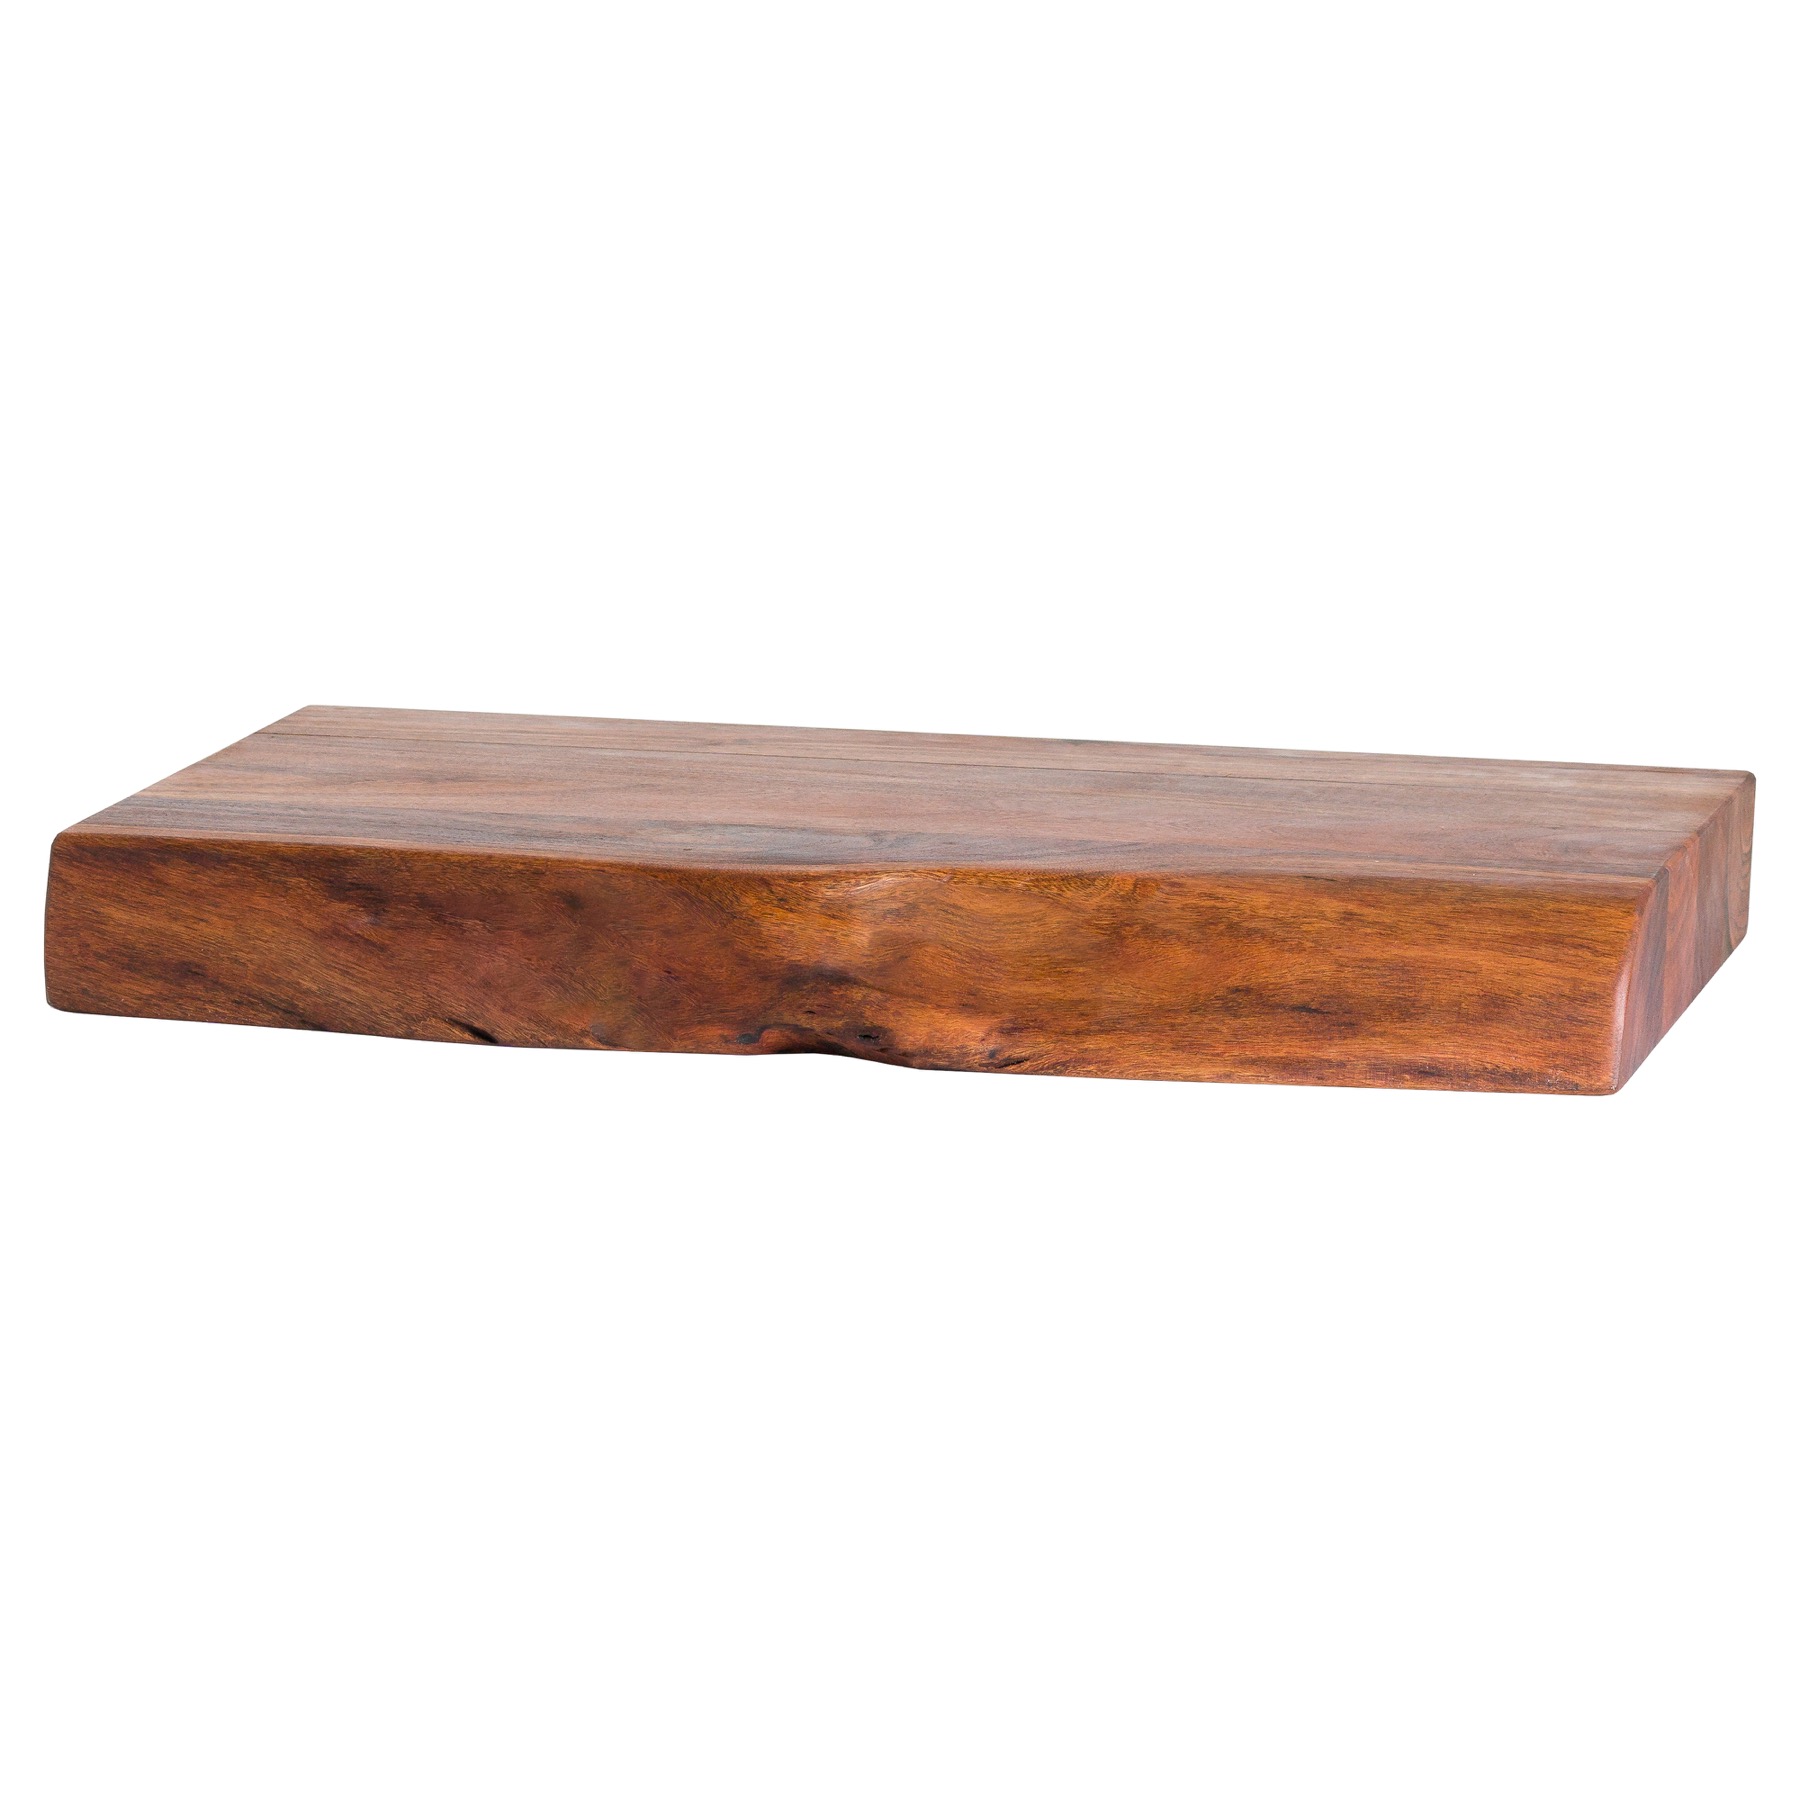 Live Edge Collection Large Pyman Chopping Board - Image 1